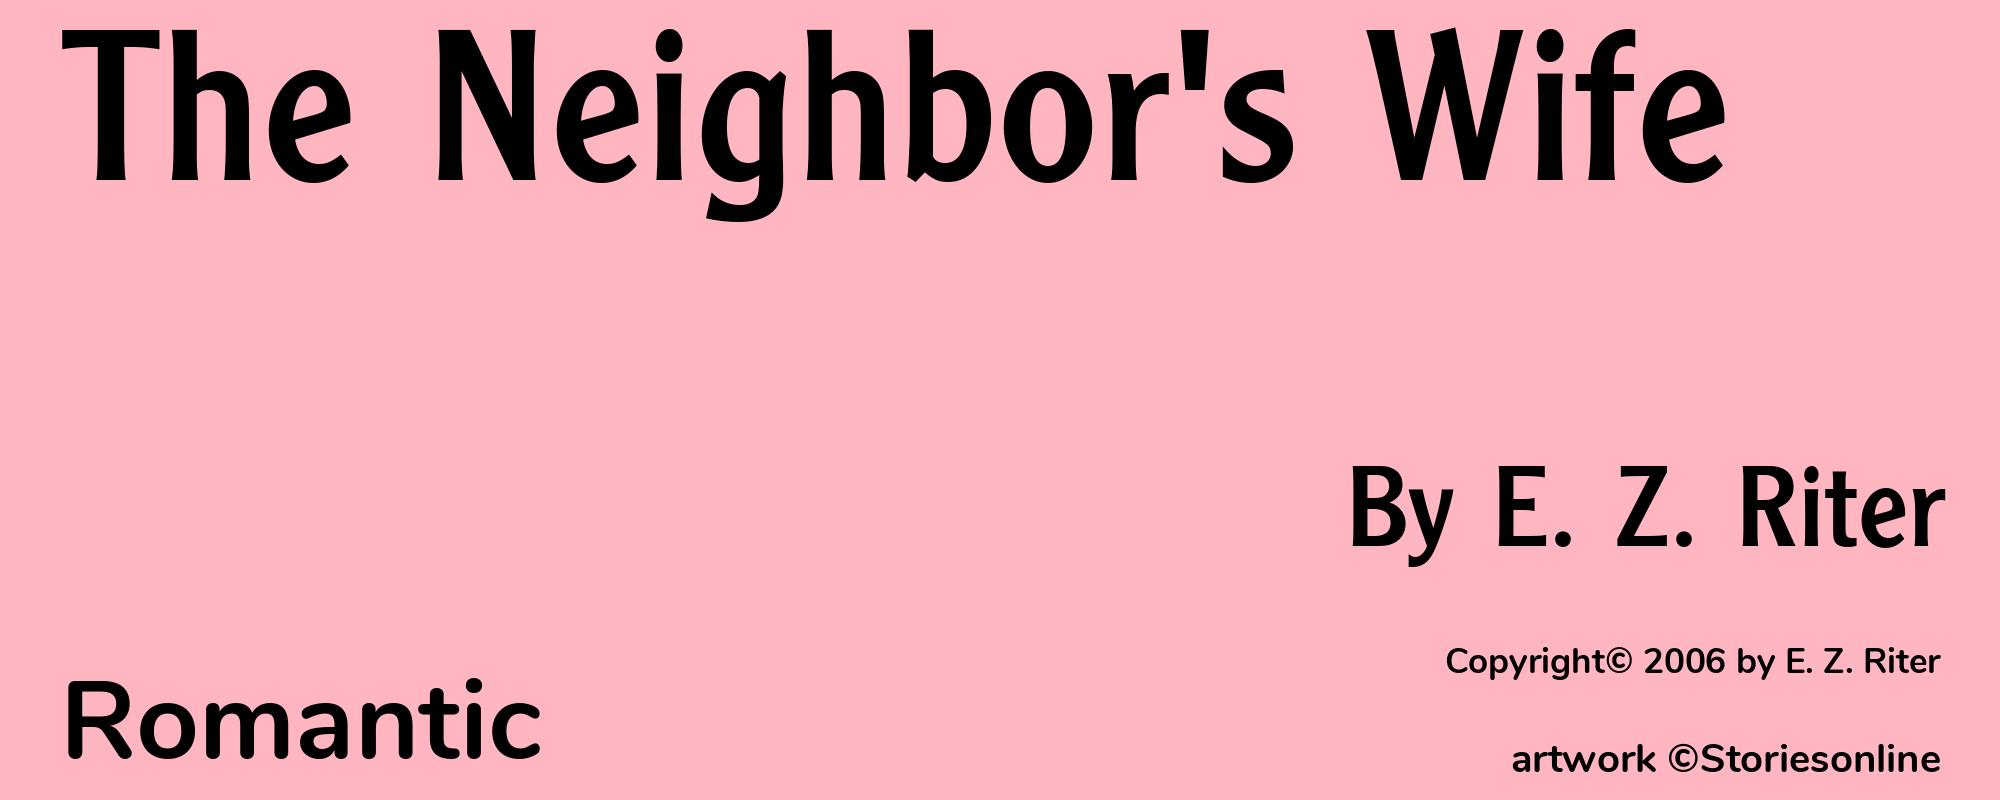 The Neighbor's Wife - Cover